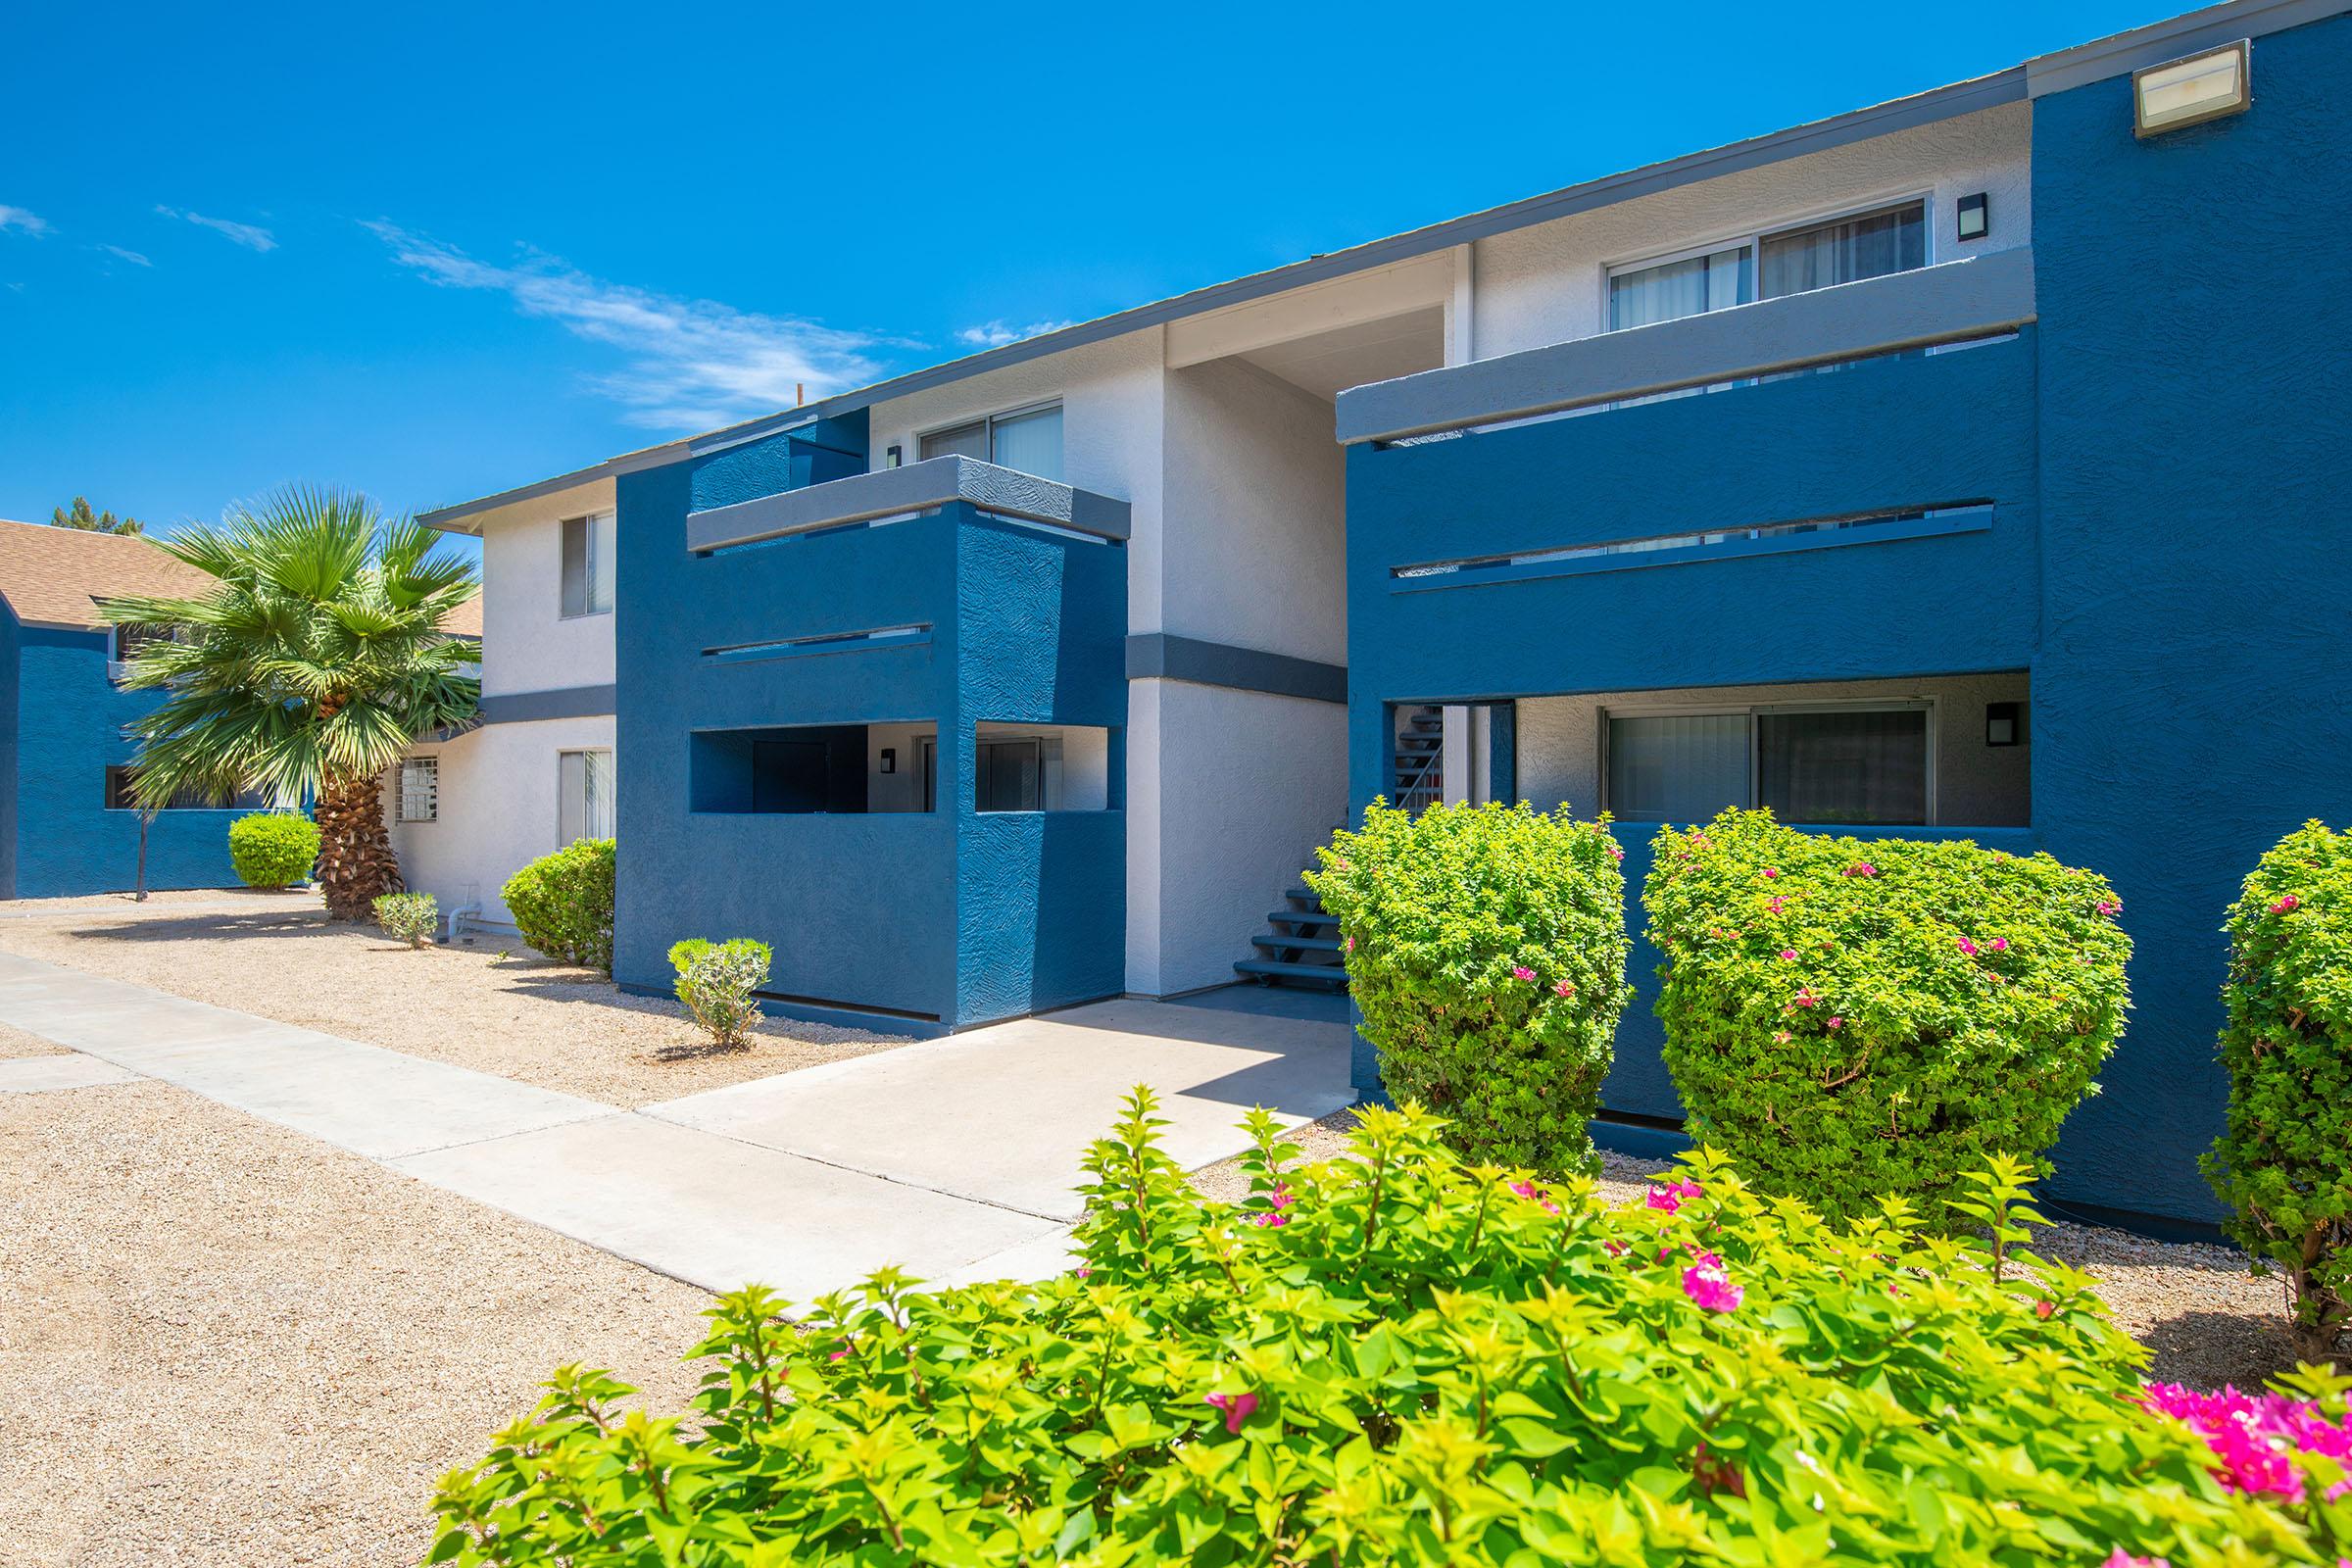 Navy blue Rise at the District Mesa apartment building exterior featuring large balconies and green landscaping